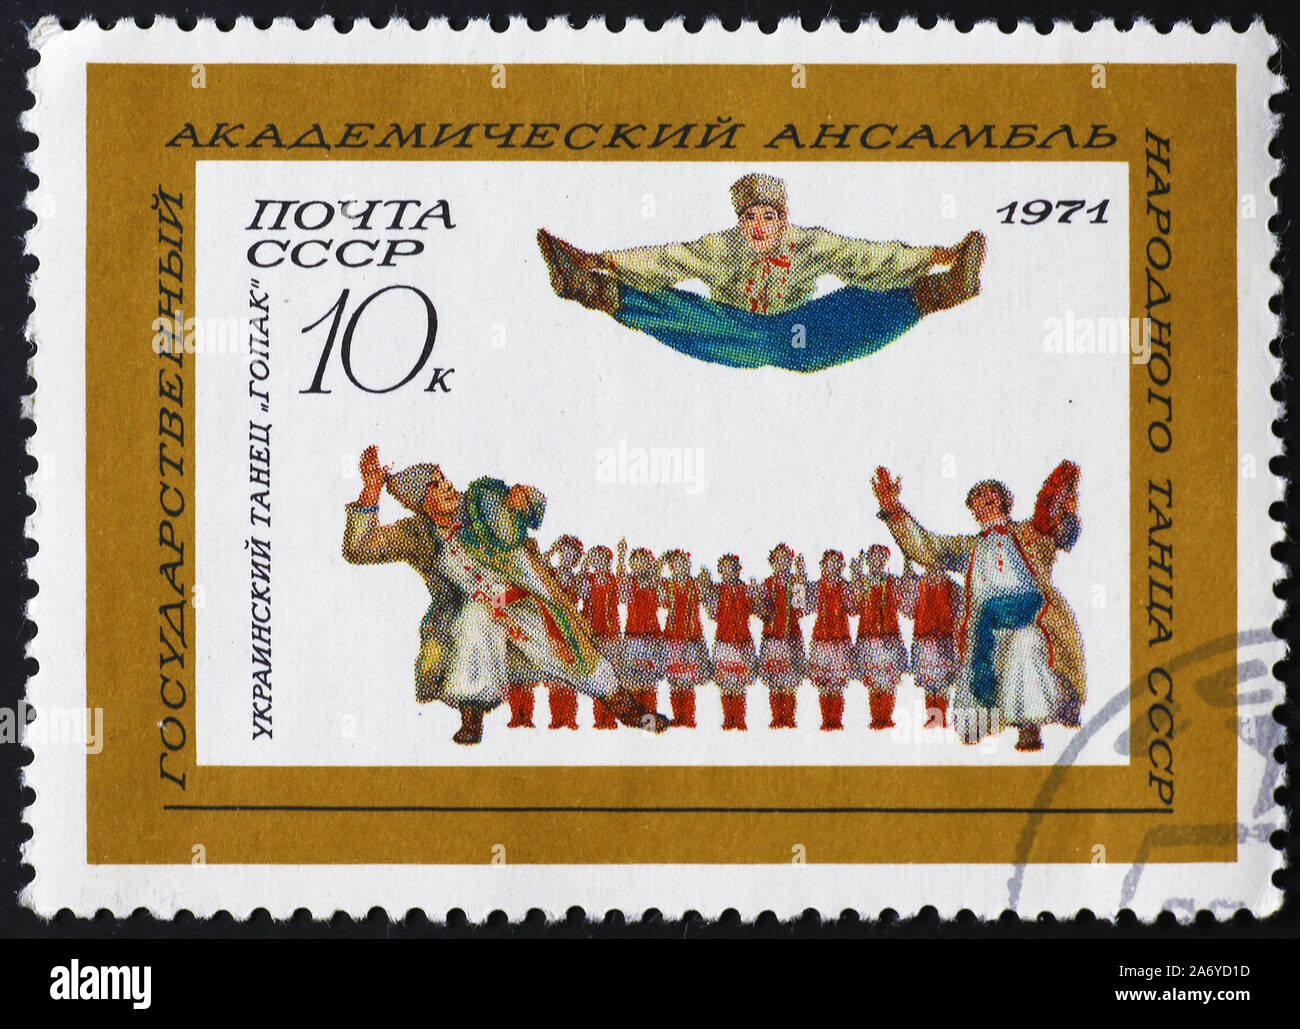 Acrobatic russian dancers on postage stamp Stock Photo